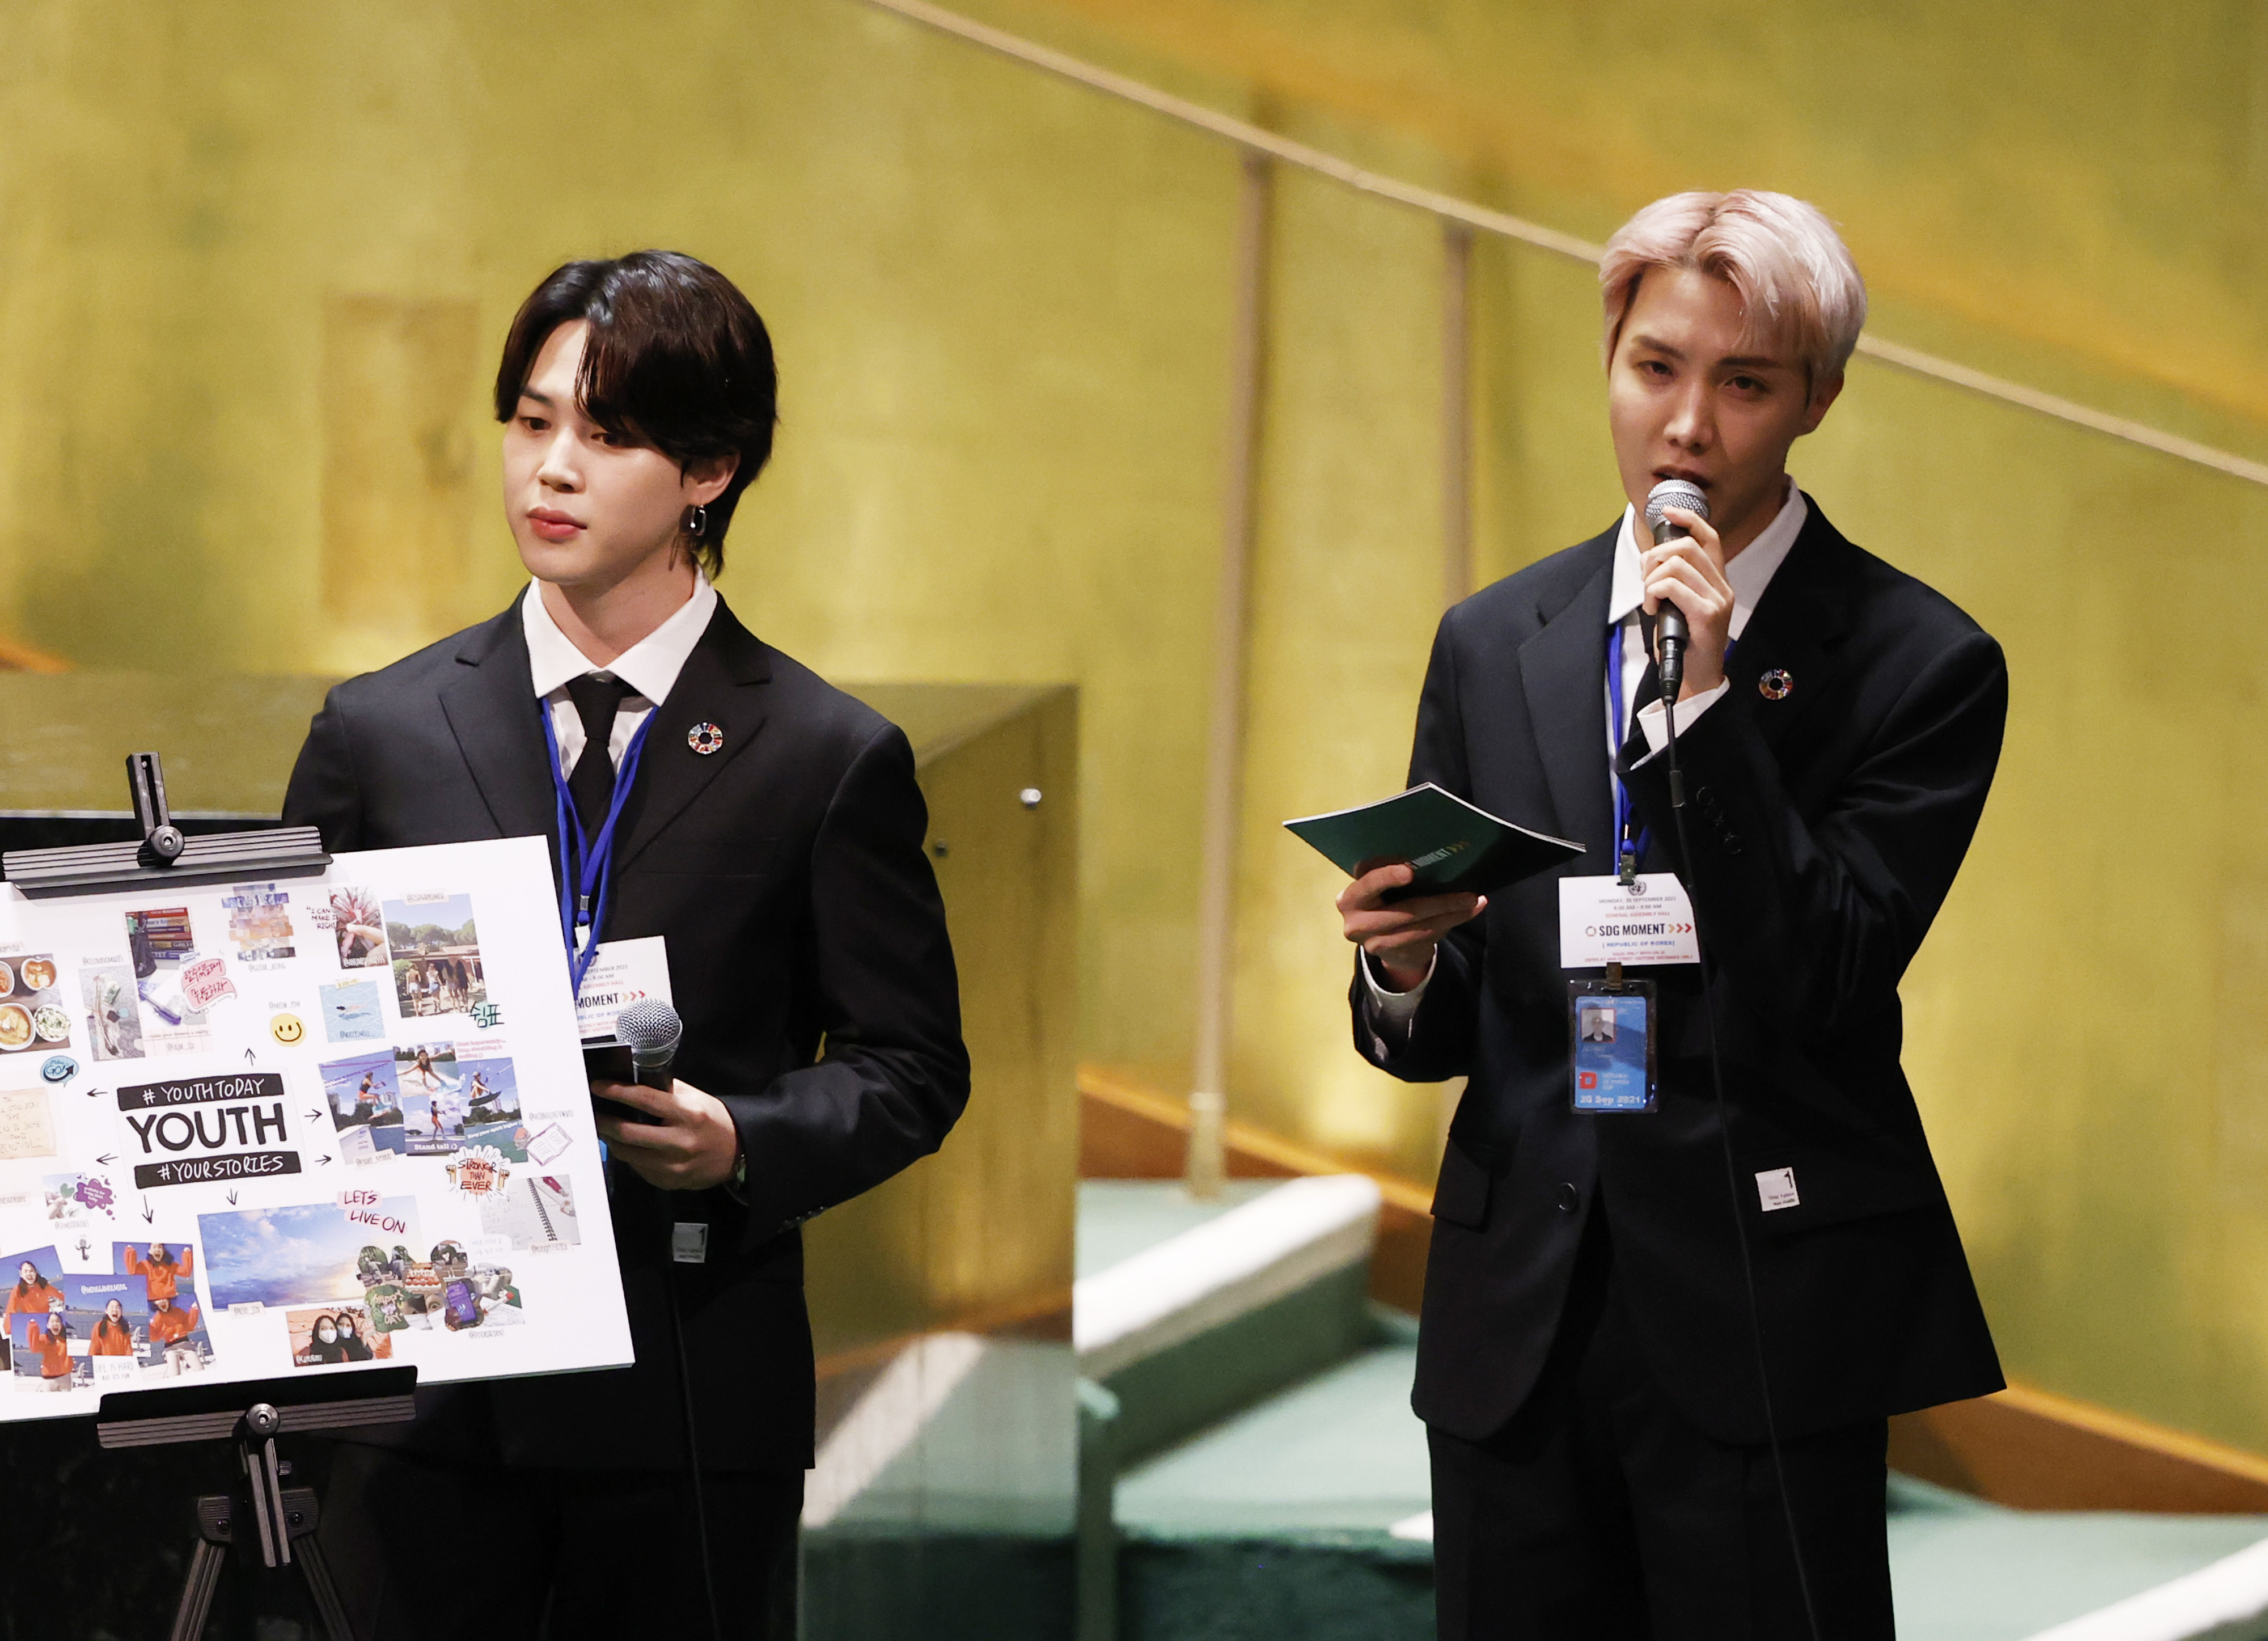 Does BTS Earn Their Spot at the UN General Assembly?